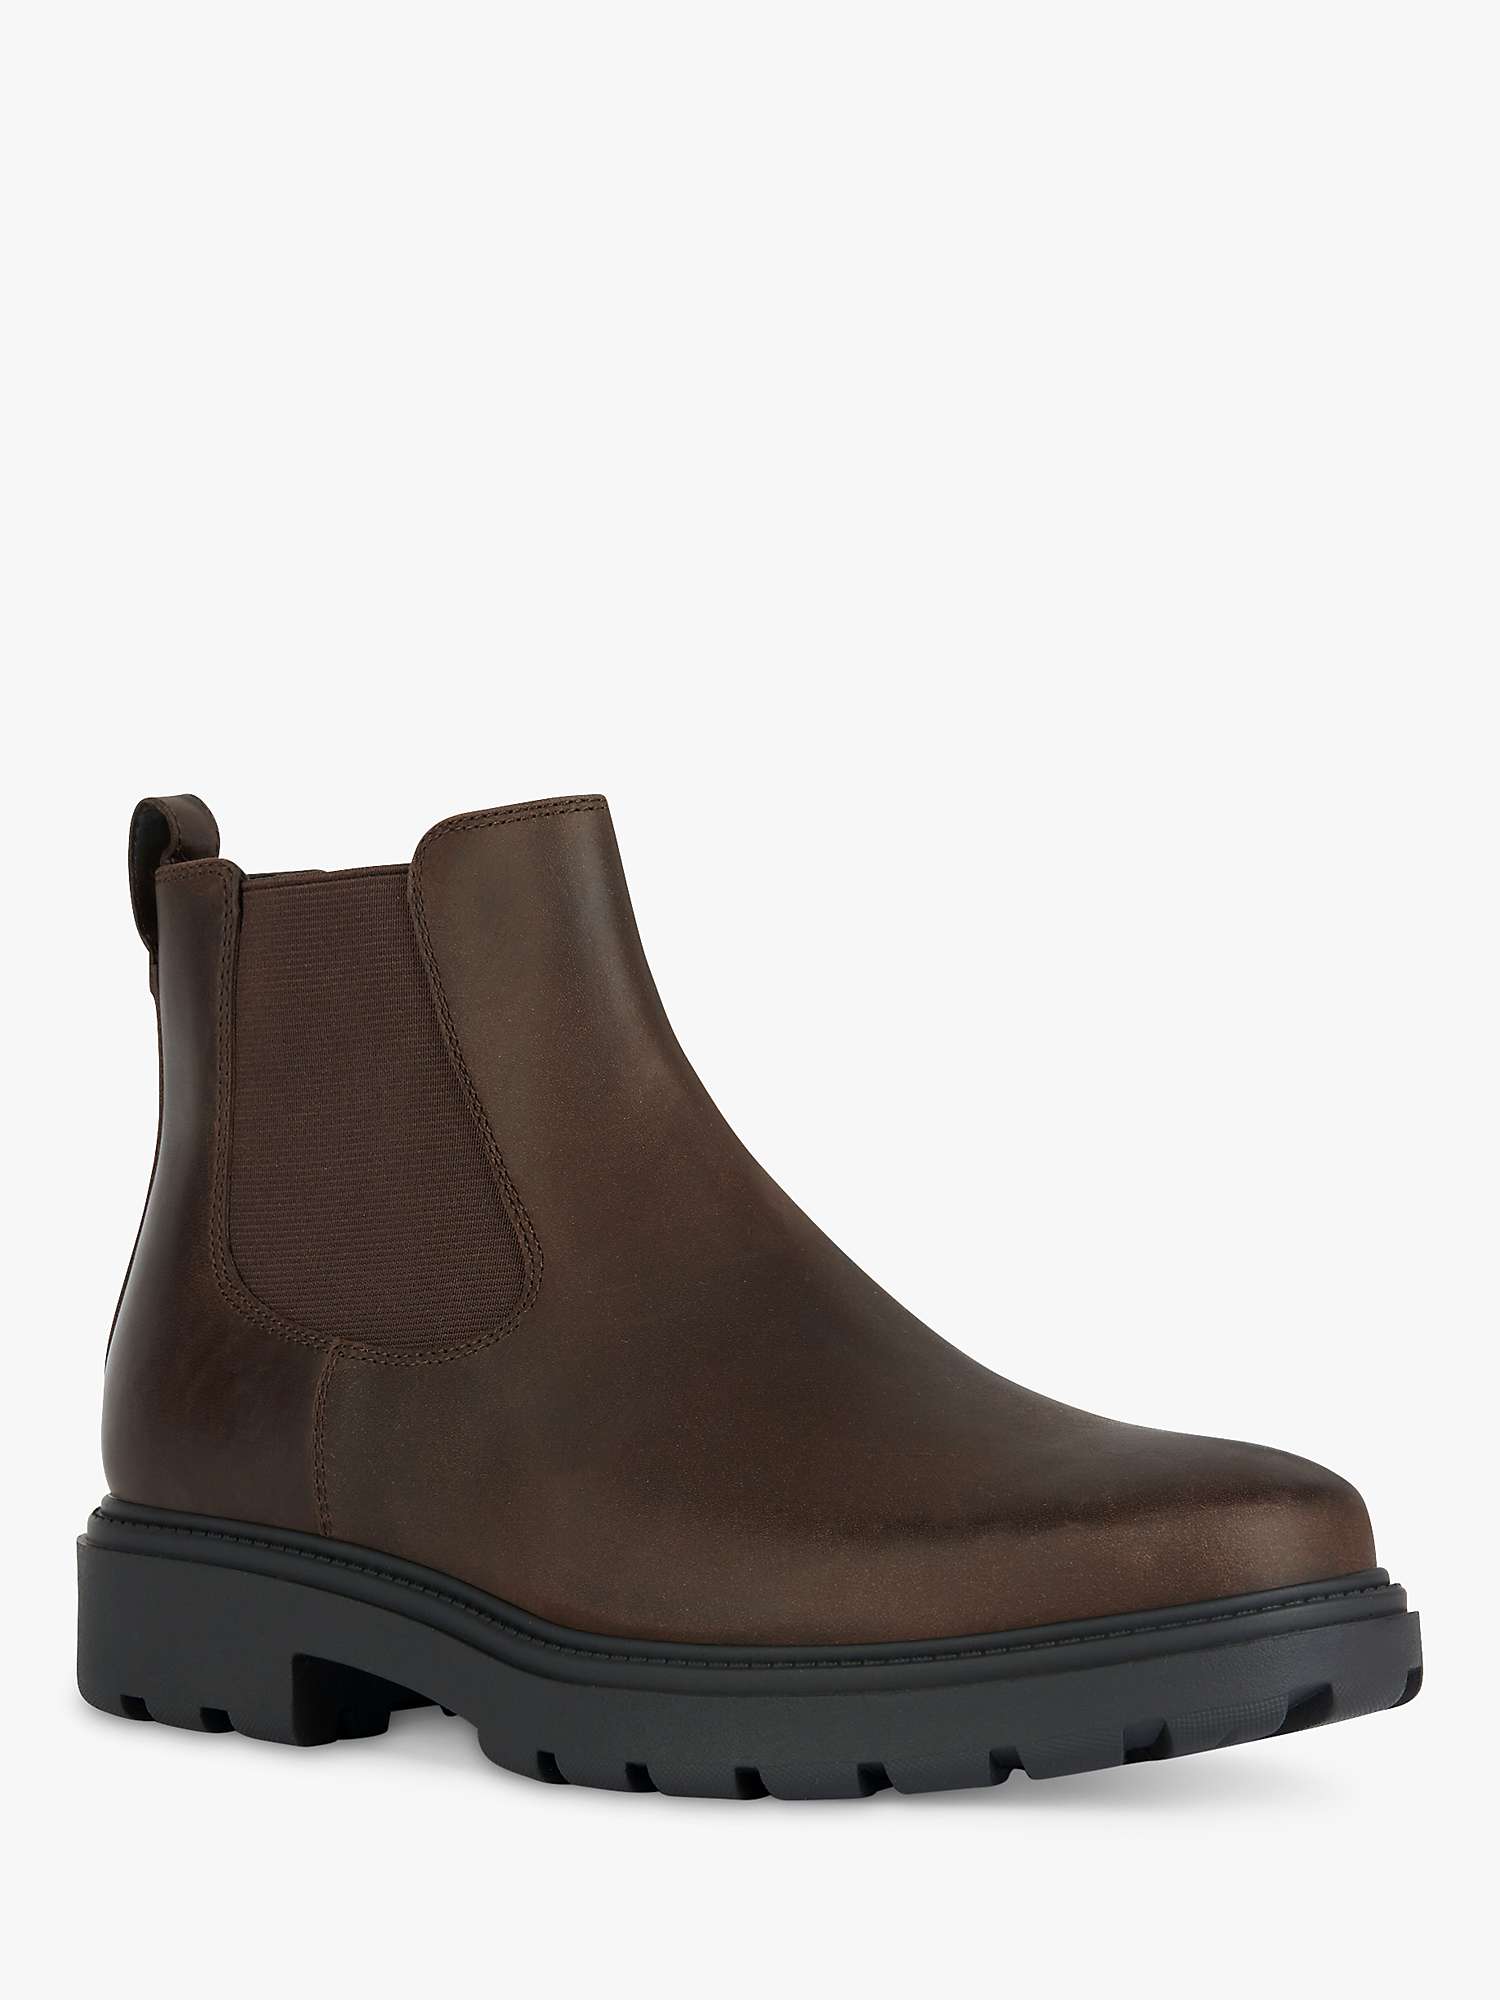 Buy Geox Wide Fit Spherica EC7 Leather Ankle Boots, Coffee Online at johnlewis.com